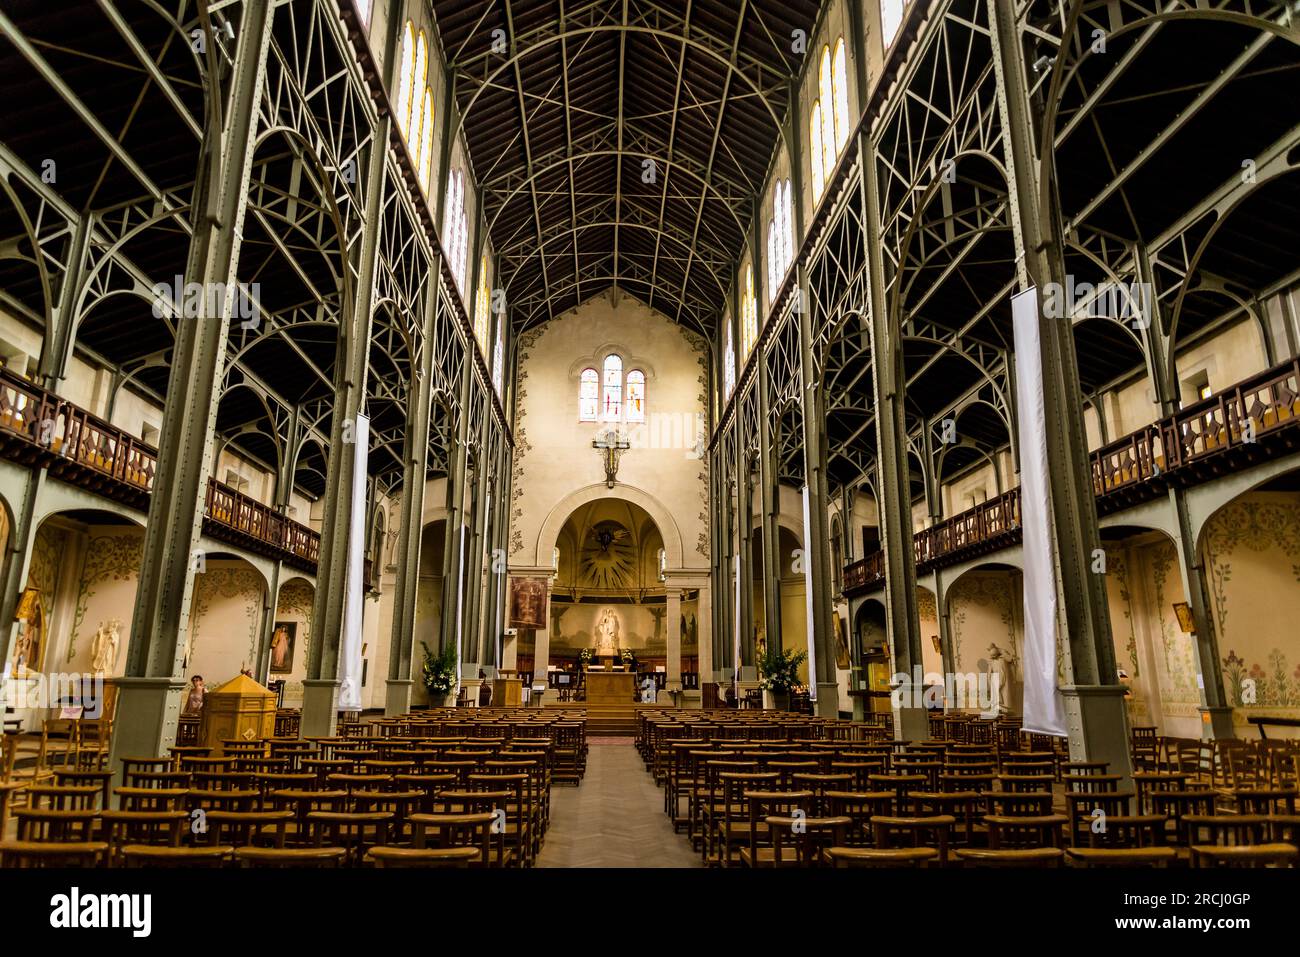 Church of Our Lady of Labour, Late 1800s church with industrial-style iron pillars & arches, 14th arrondissement,, Paris, France Stock Photo